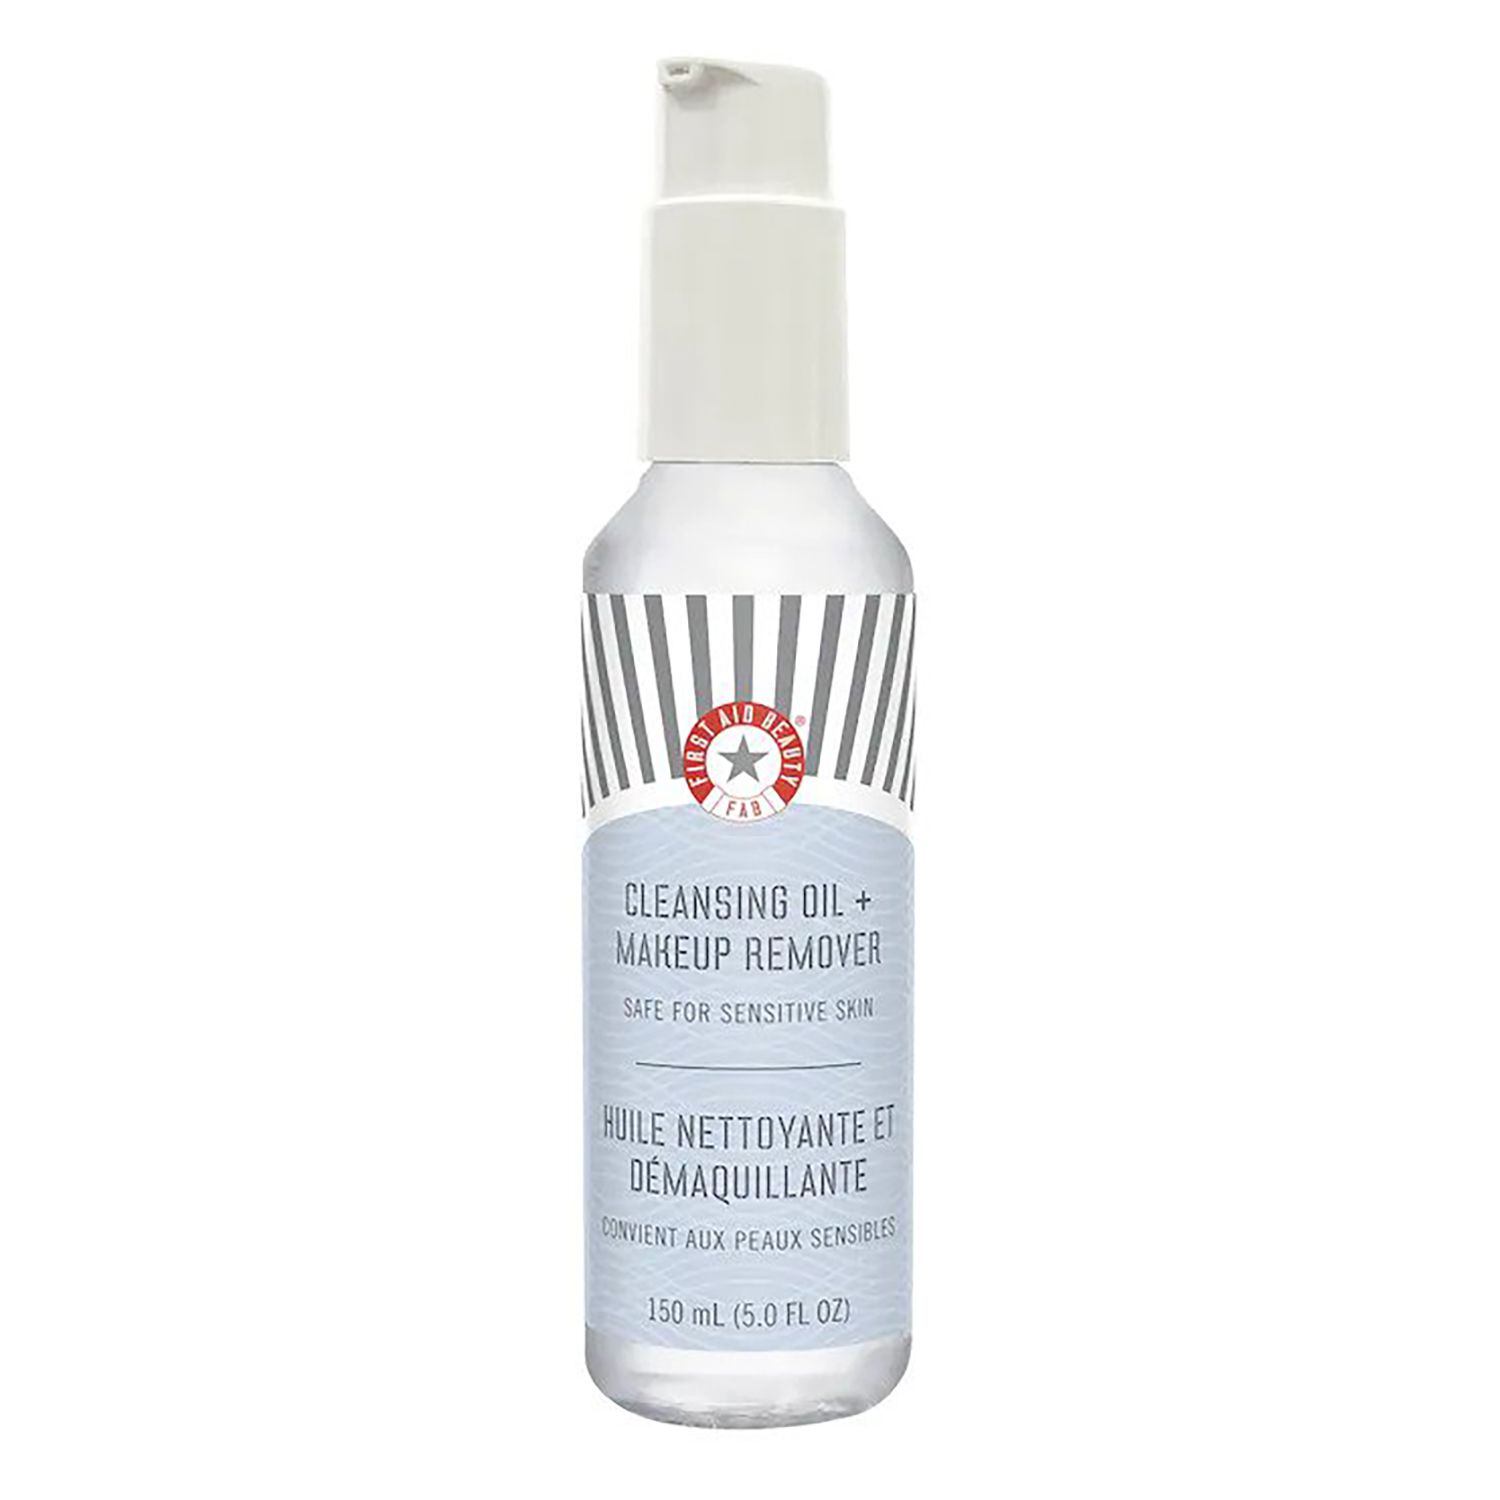 First Aid Beauty 2-in-1 Cleansing Oil + Makeup Remover